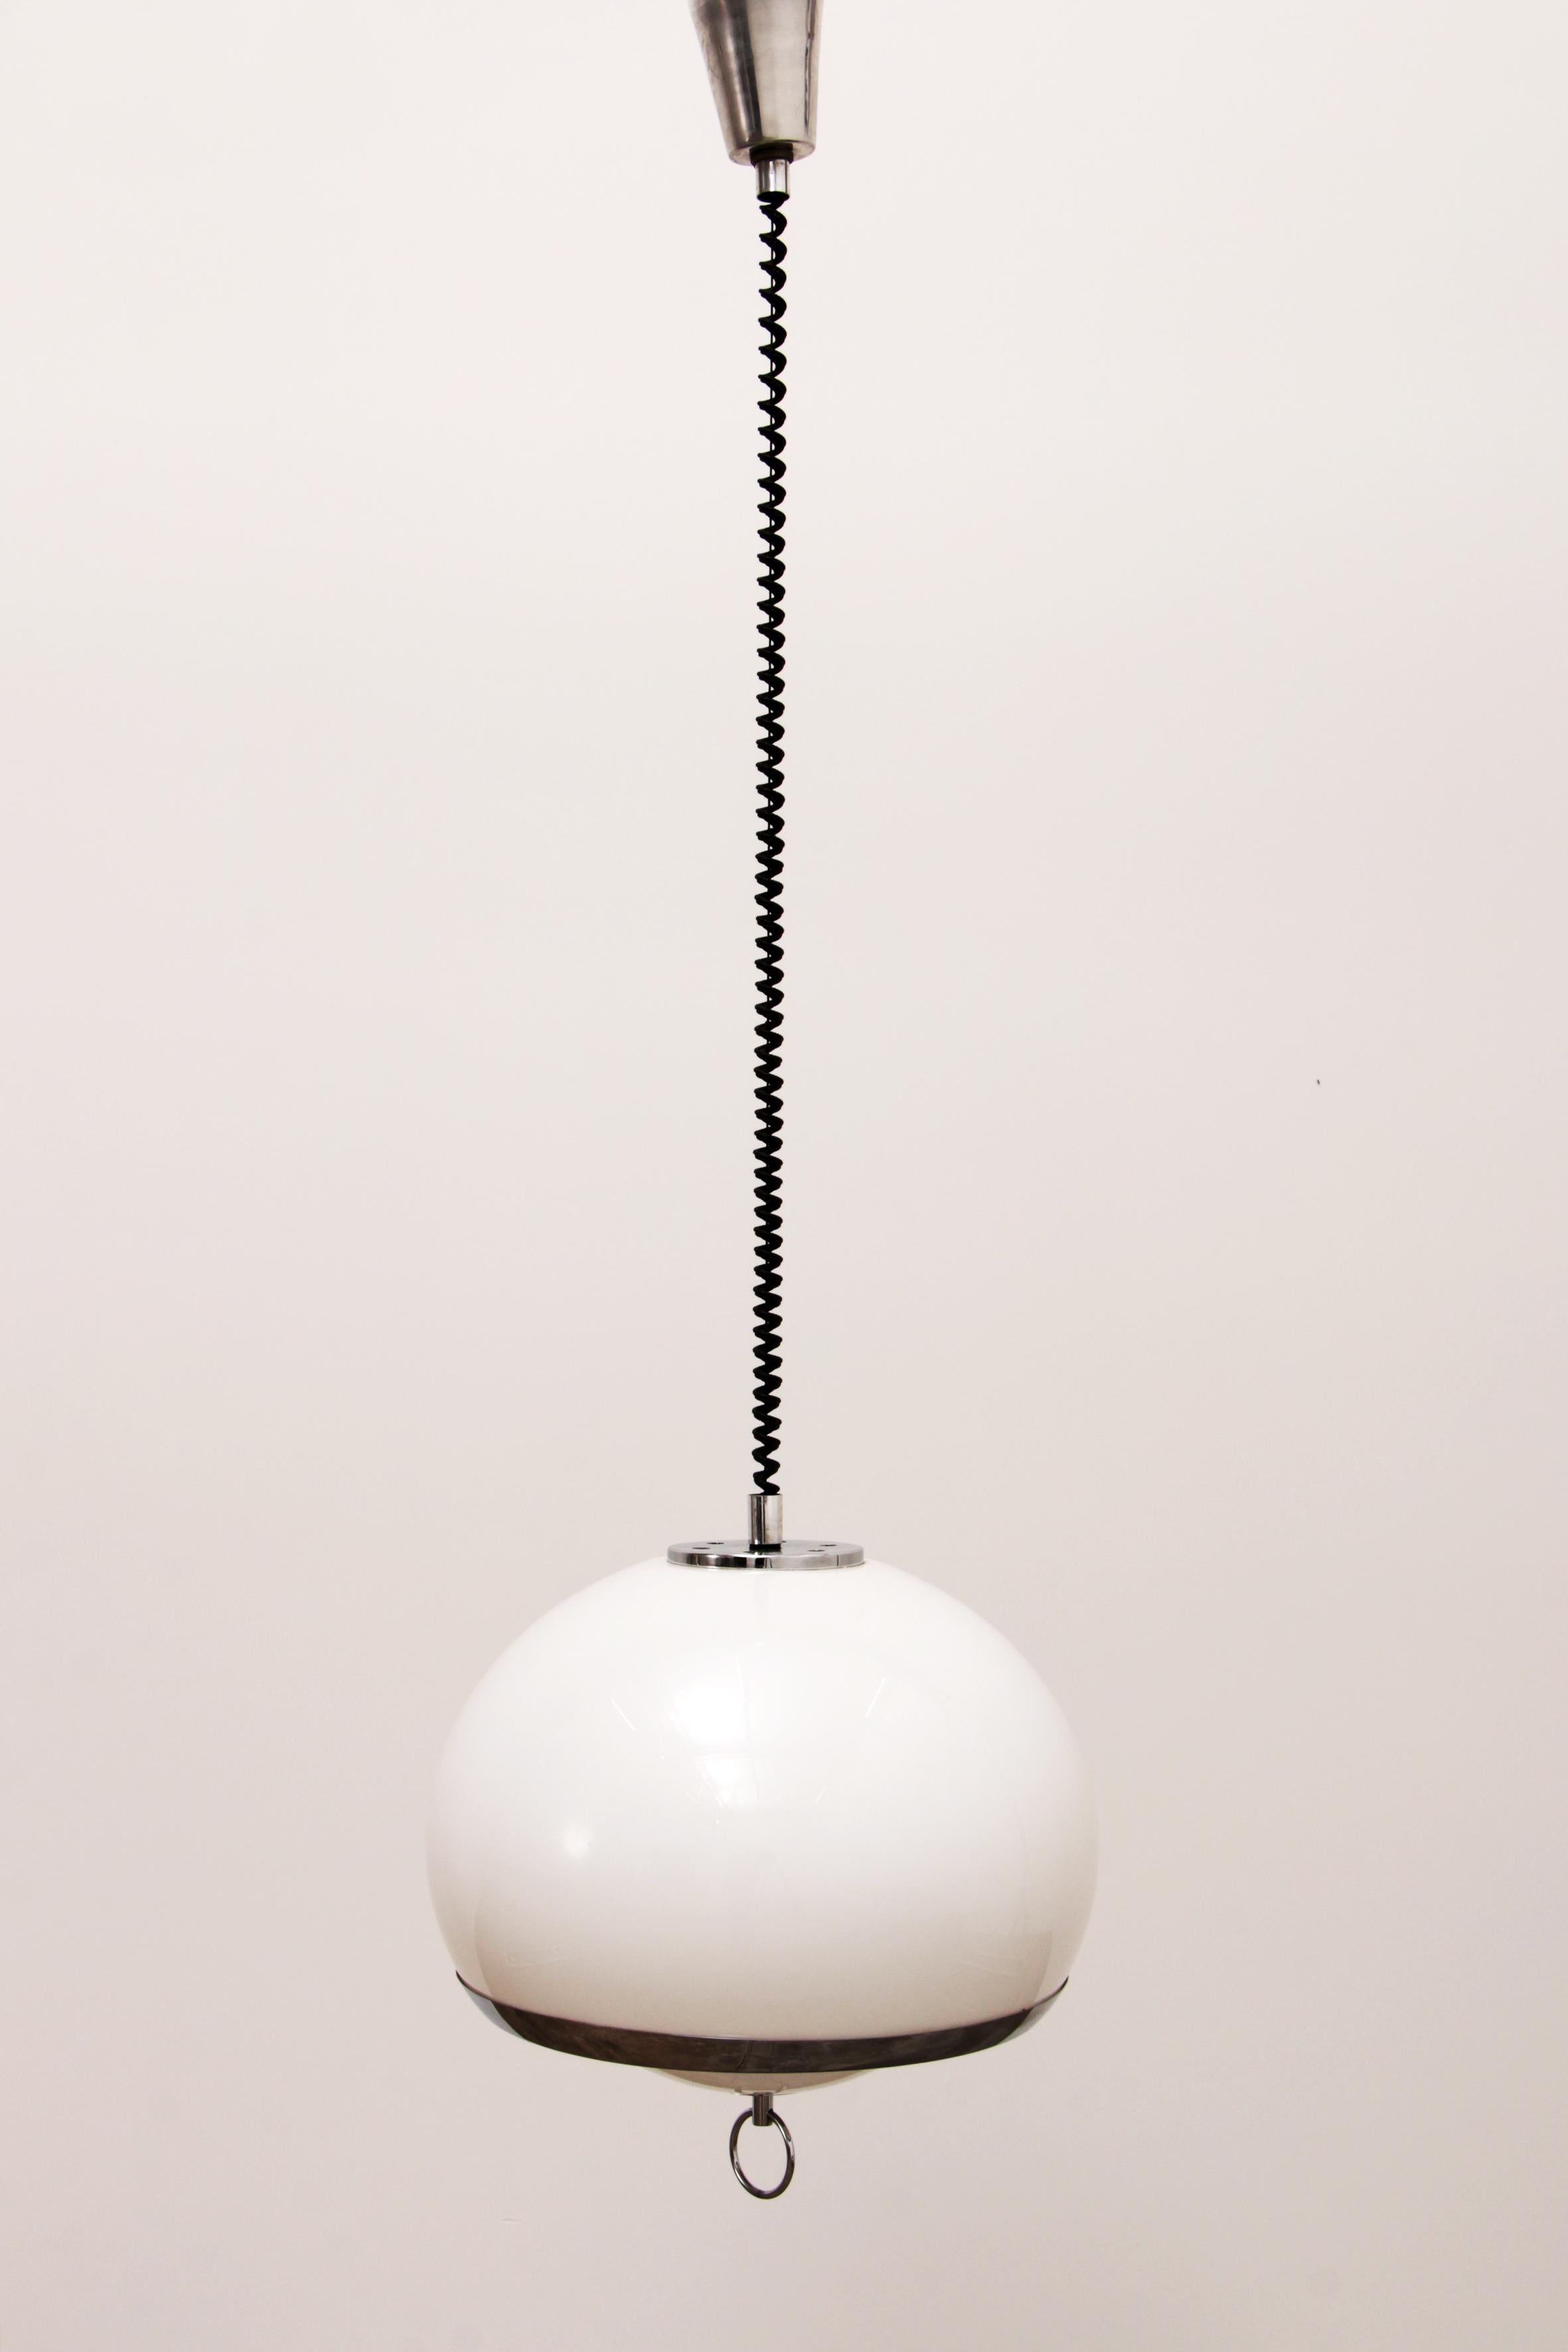 Opaline Space Age German Pendant Lamp with Harmonica Cord For Sale 7